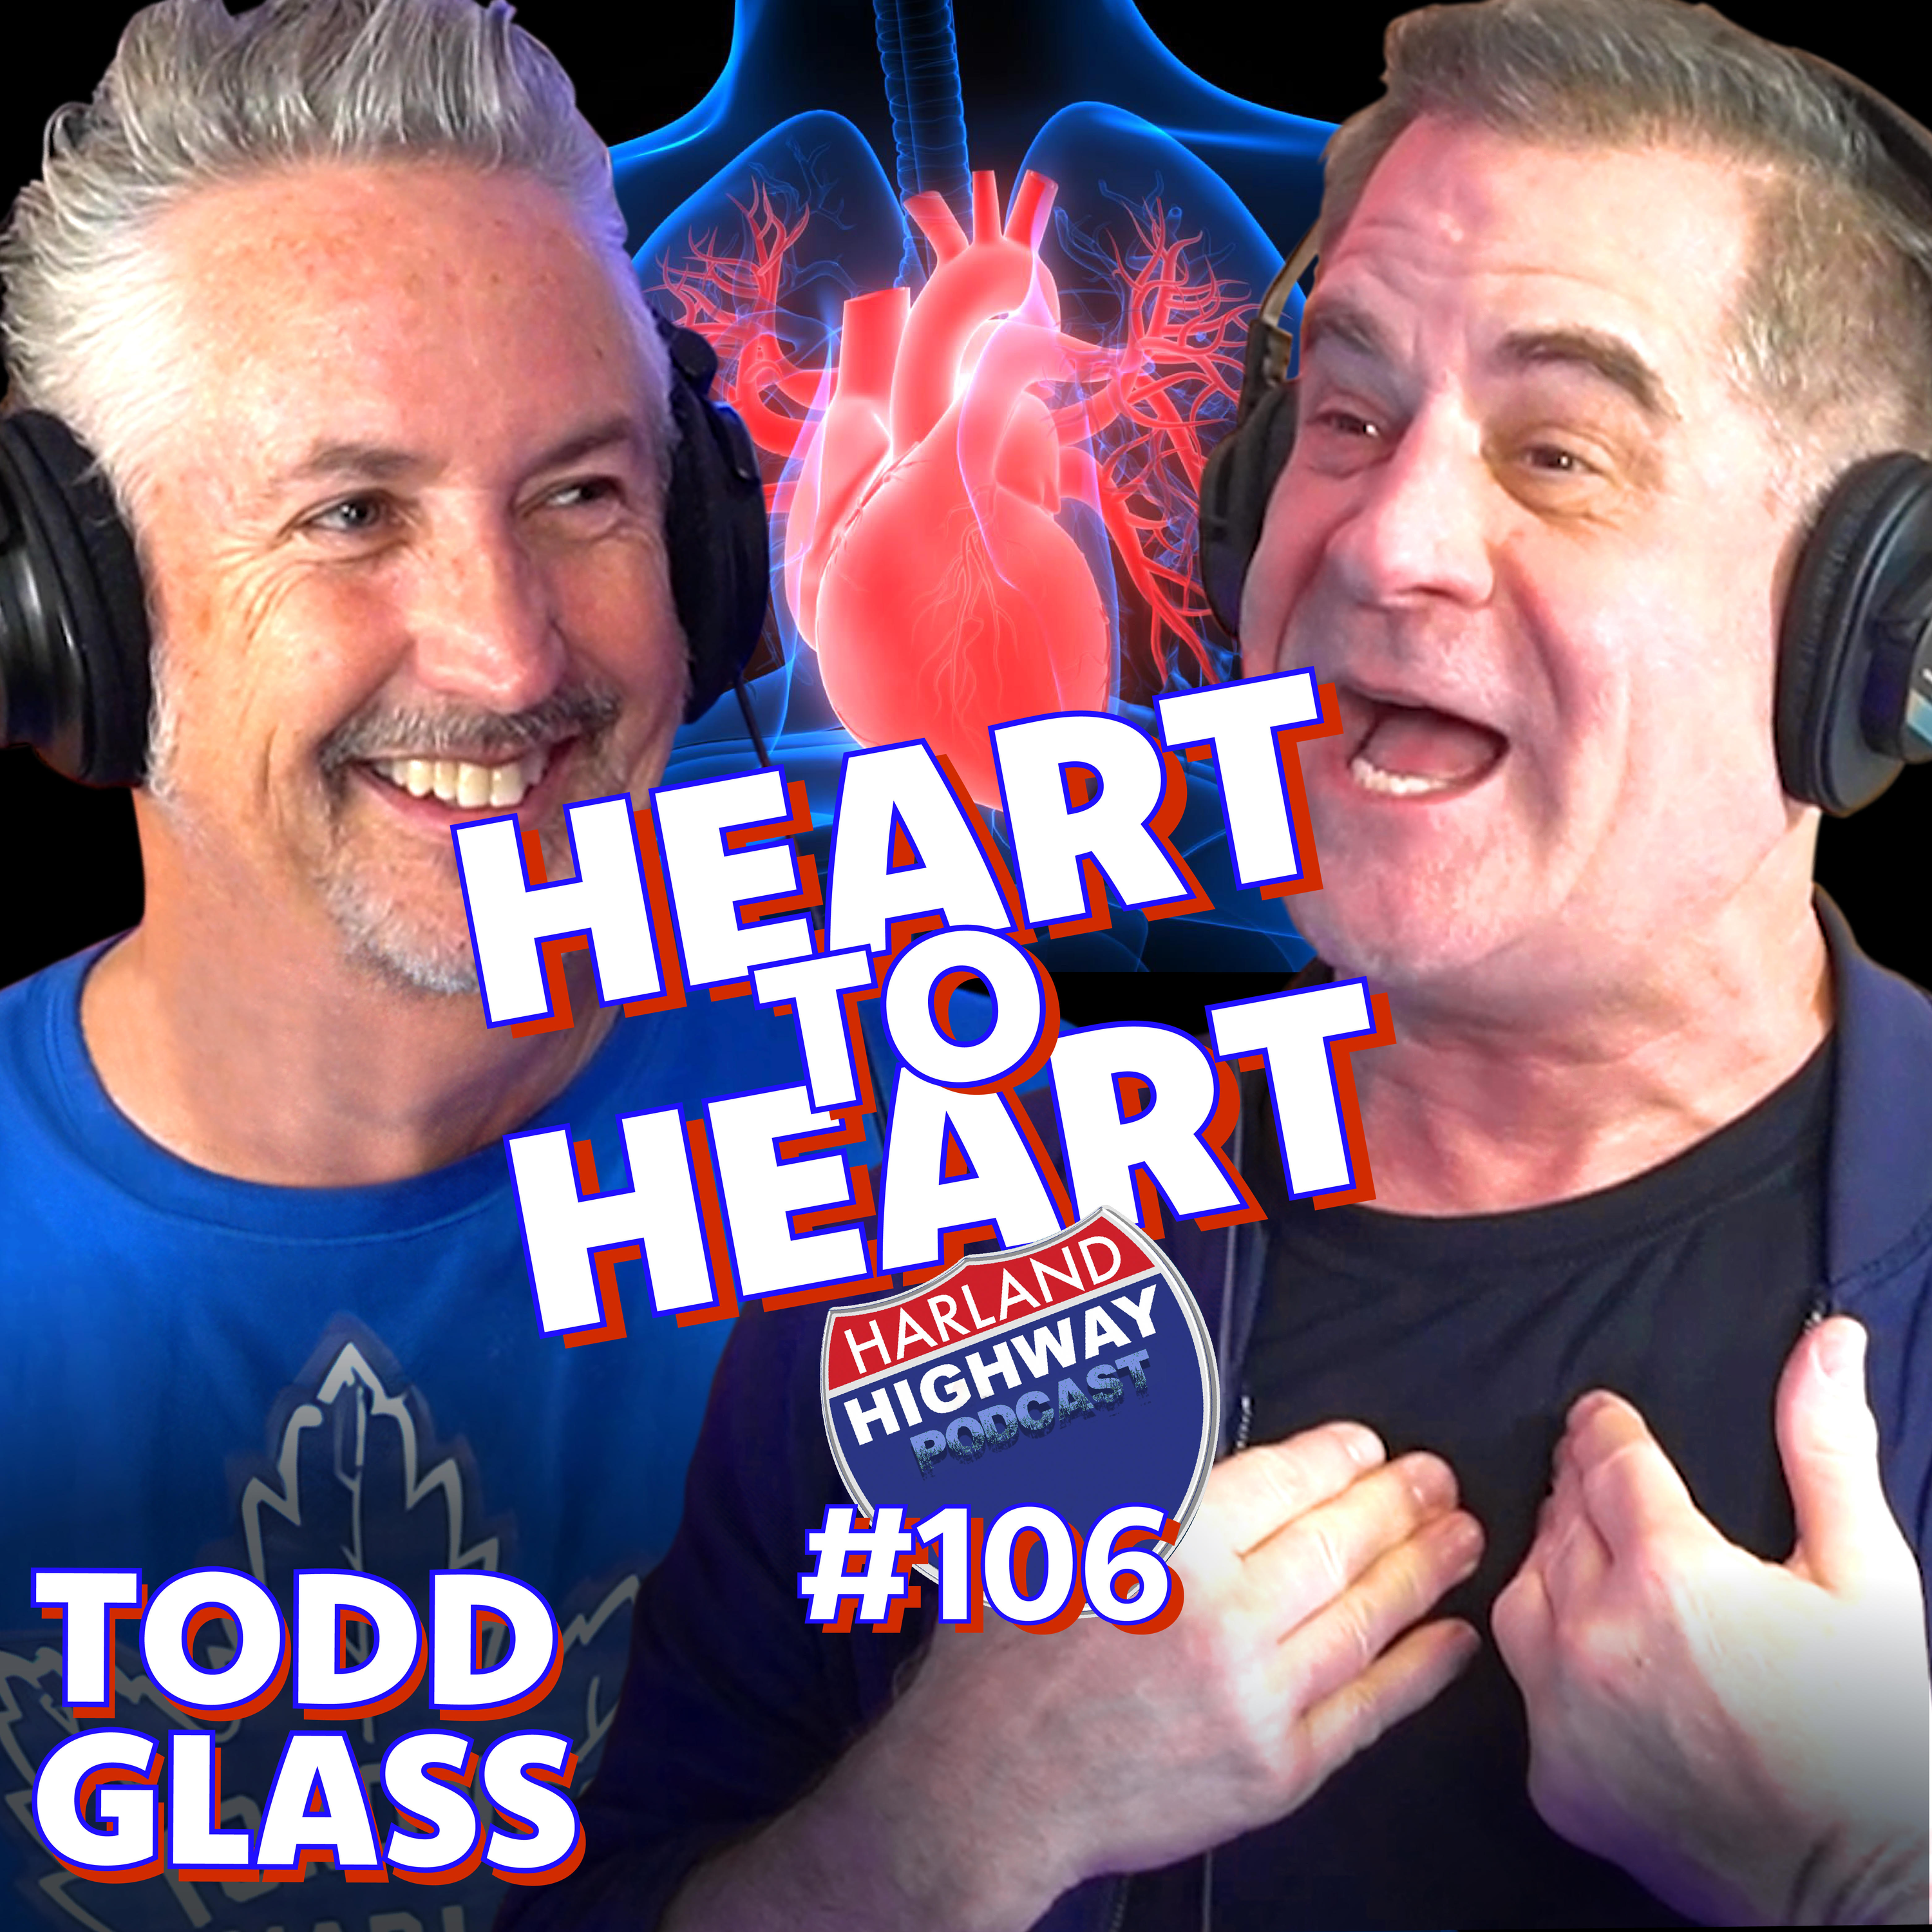 TODD GLASS- Stand up comedian, dinner party host and gum swallower!